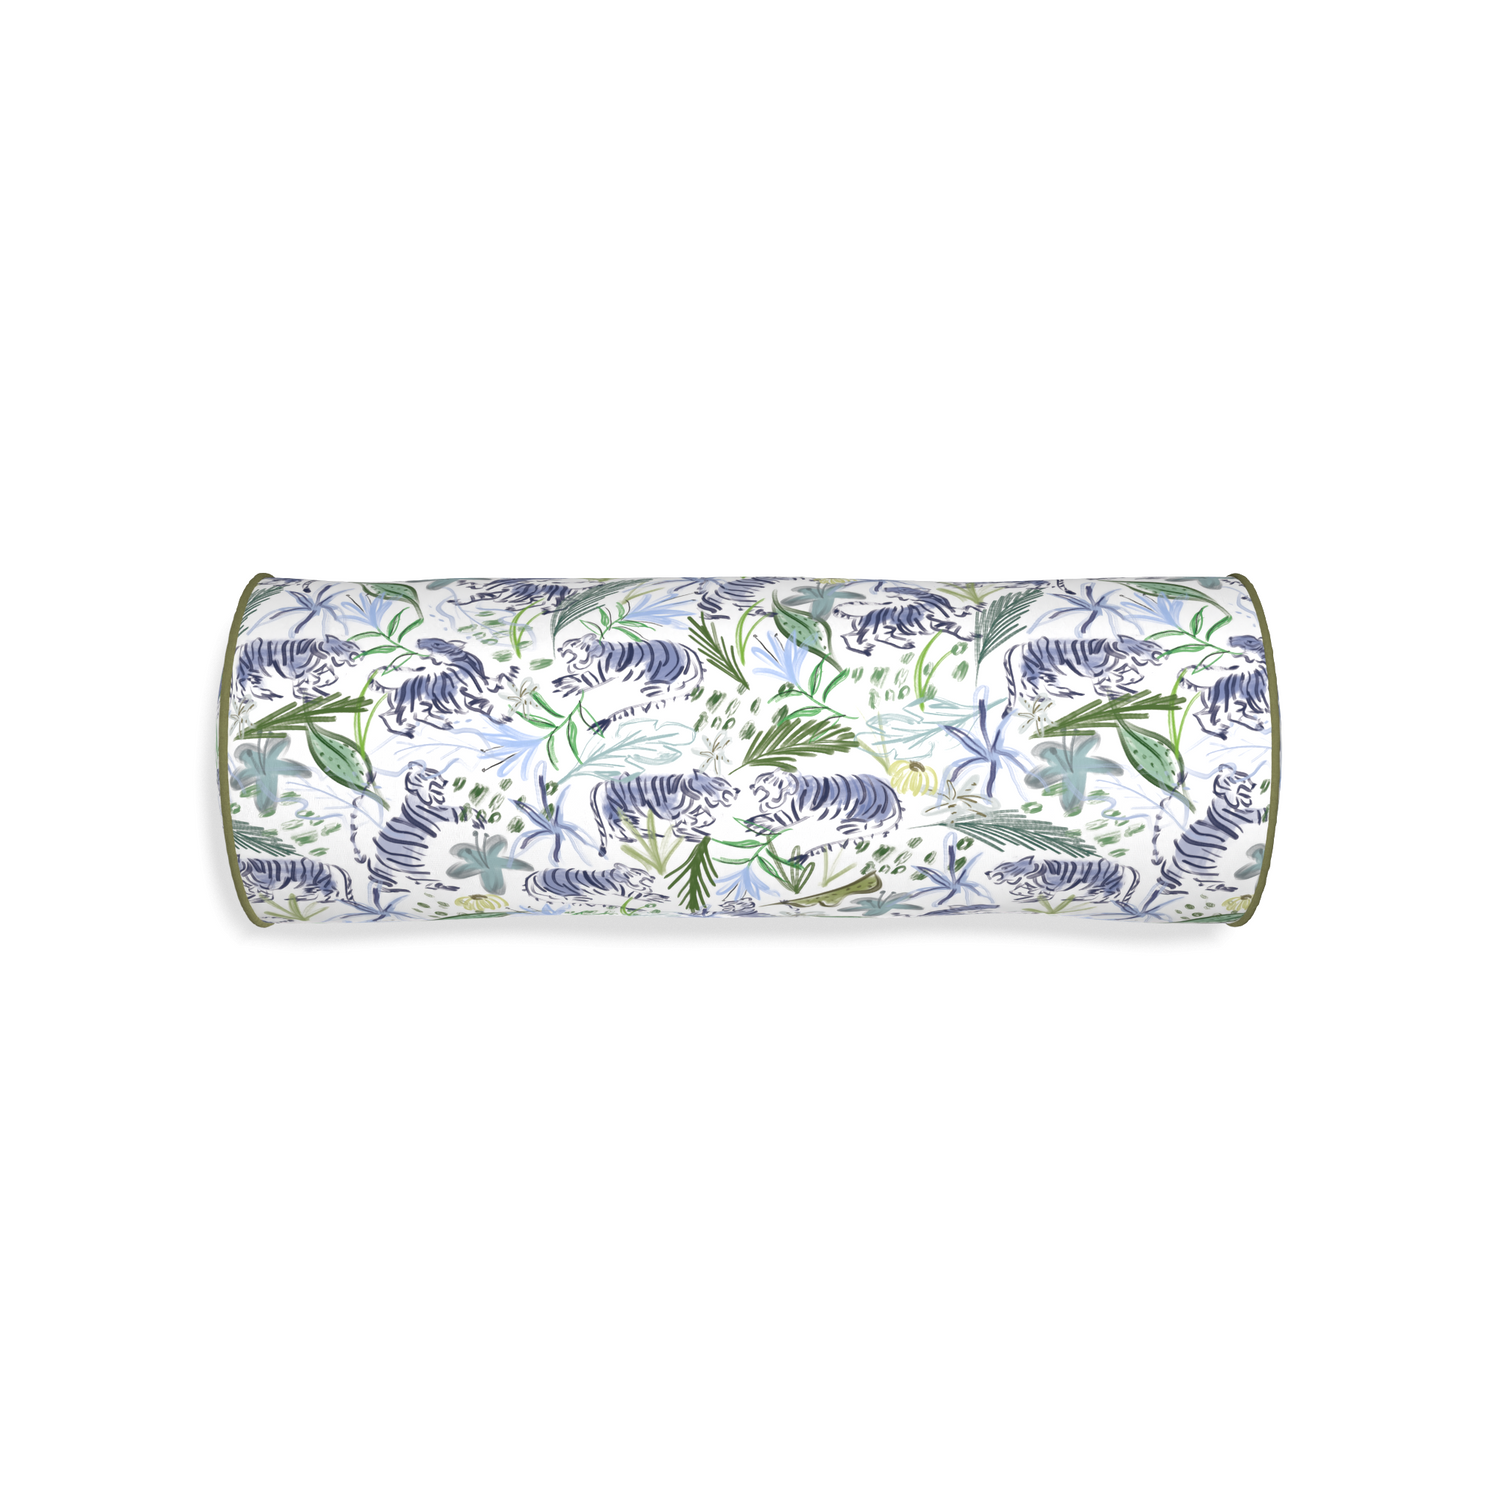 Bolster frida green custom pillow with moss piping on white background